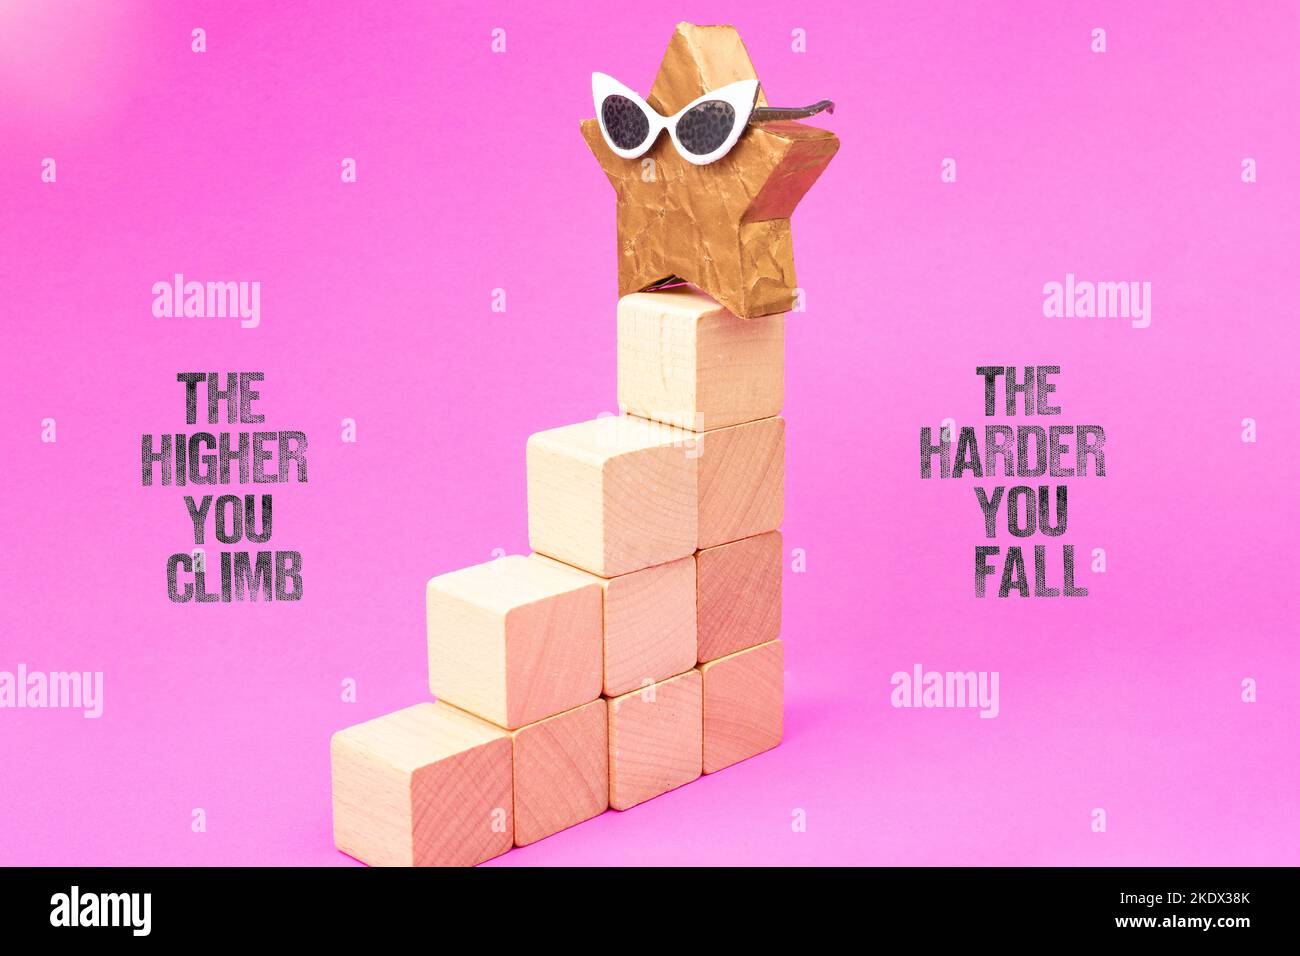 The Higher You Climb the Harder You Fall, written with textured stamp letters, next to a golden star on top of stairs made from wooden blocks Stock Photo